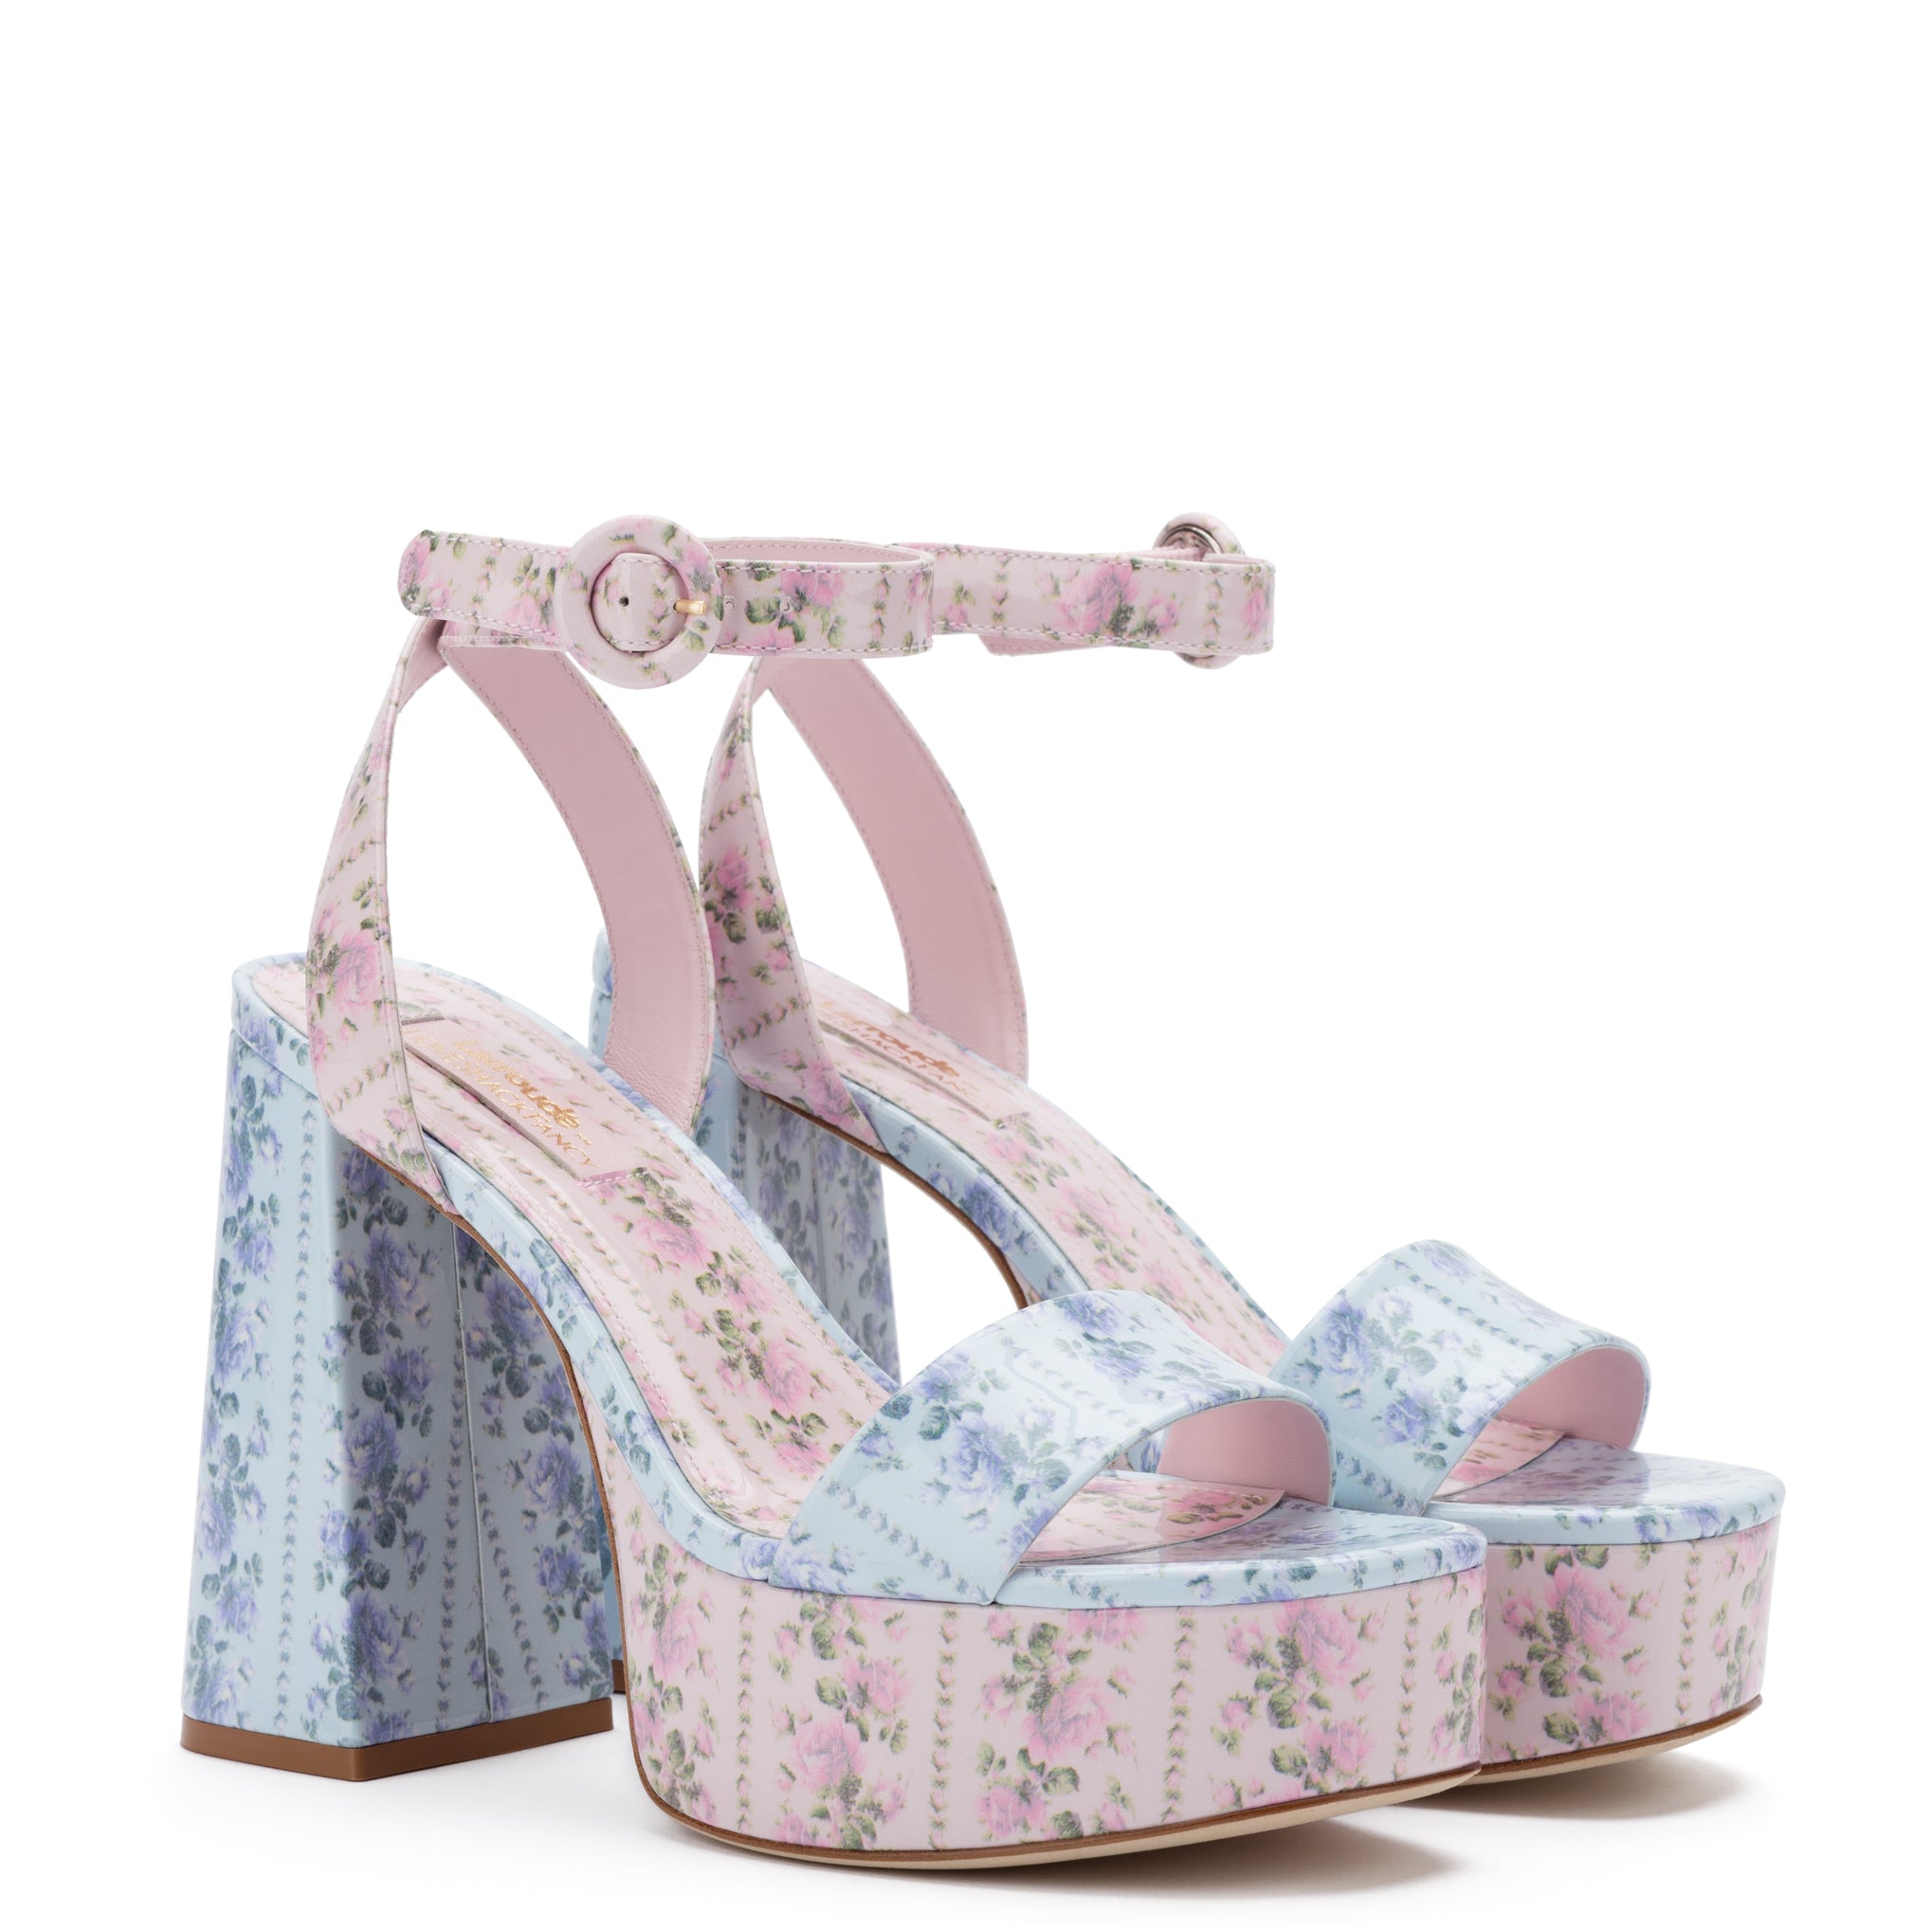 Larroudé for LoveShackFancy: Dolly Sandal In Rose Cerulian Blue and Blushing Pink Patent